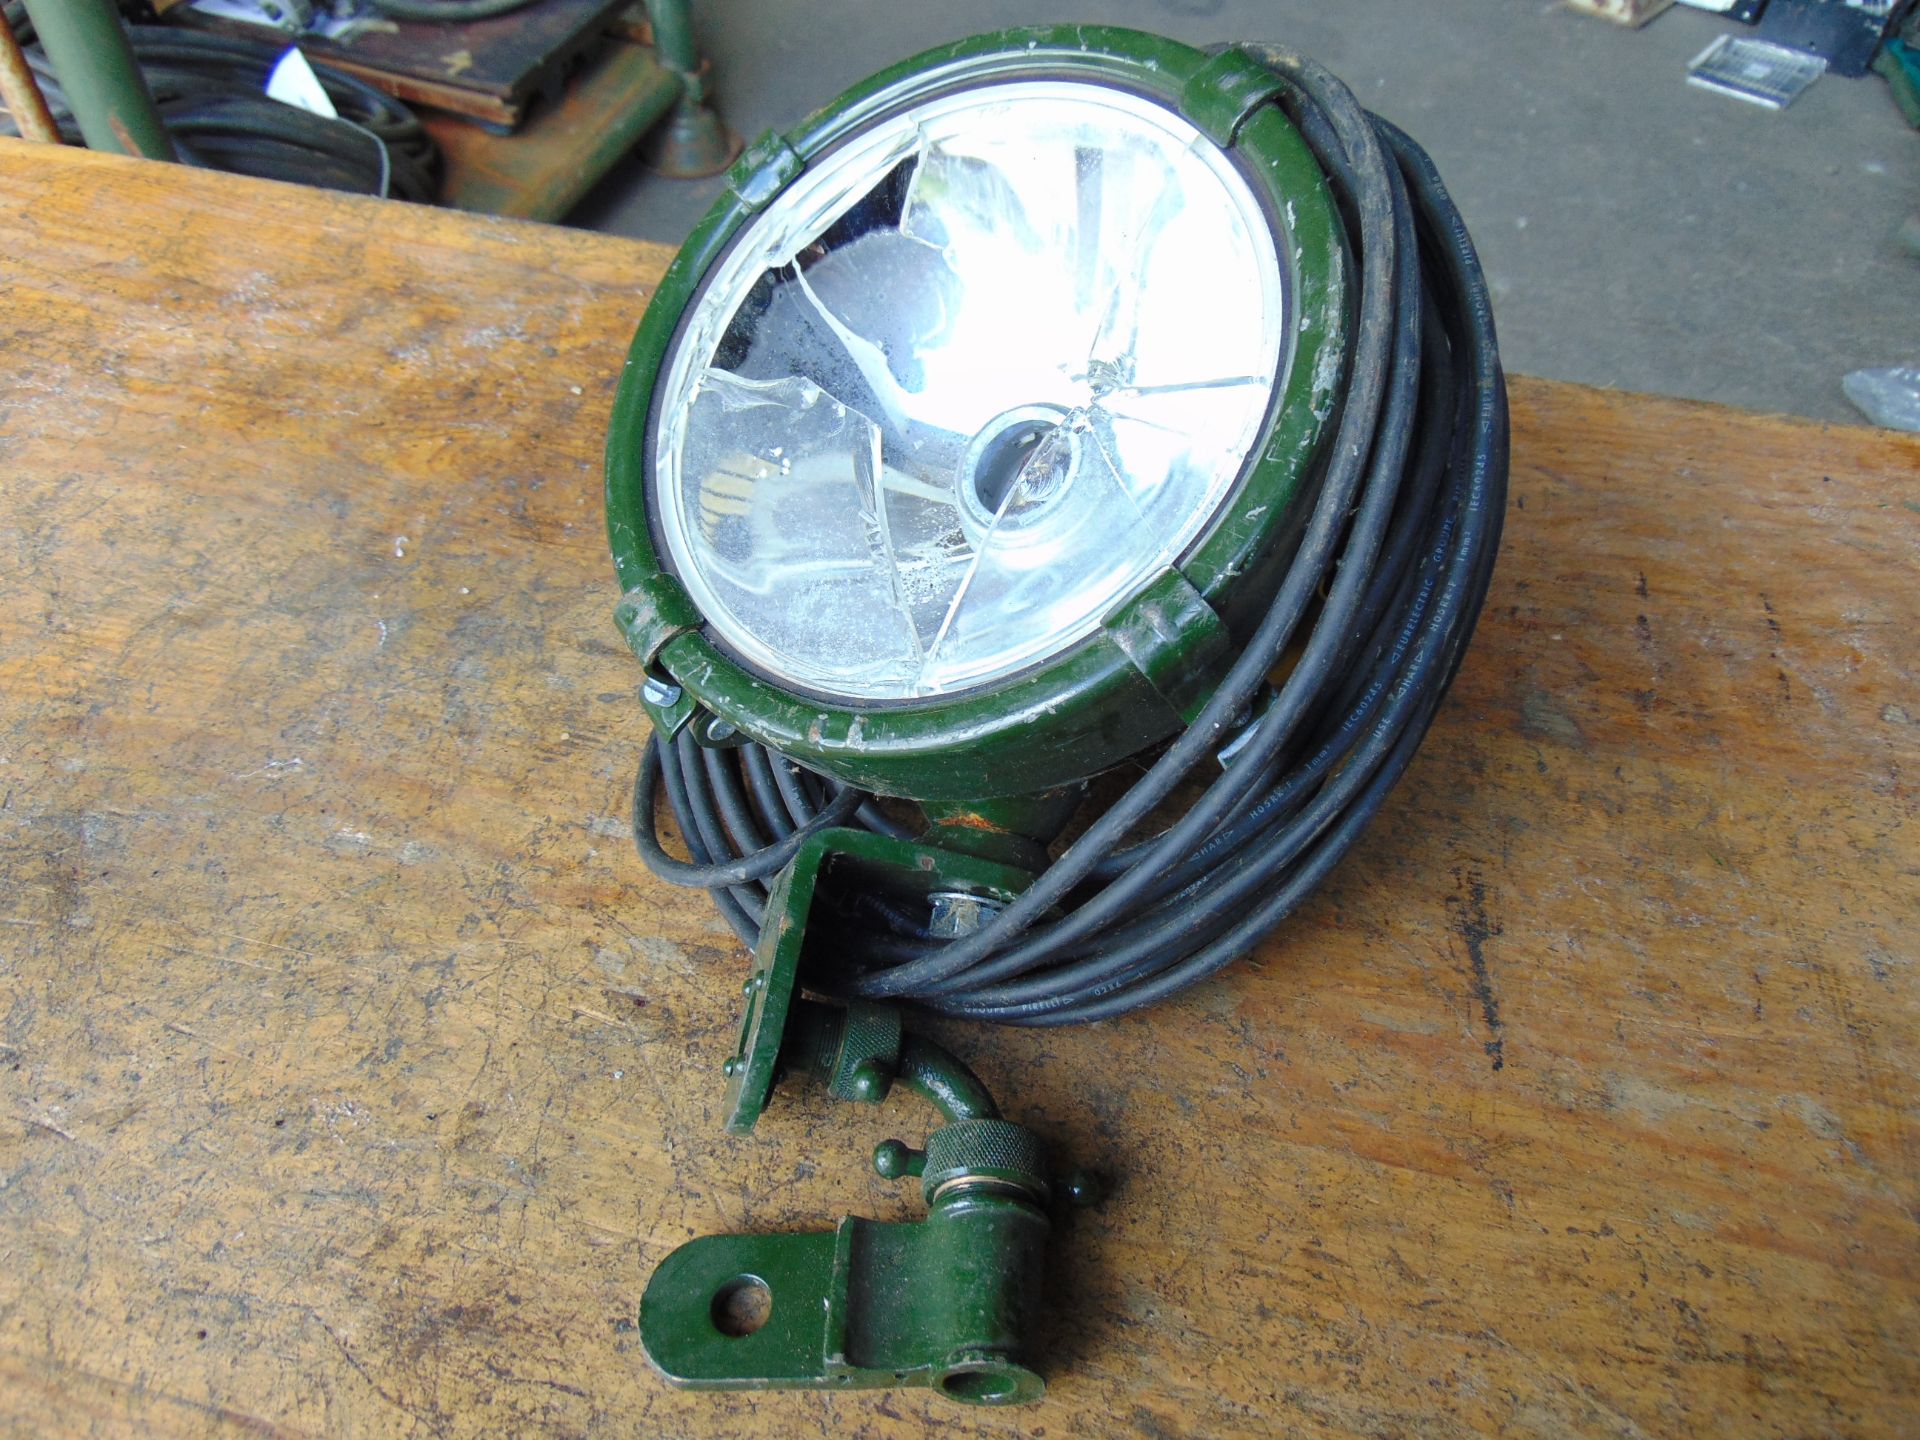 British Army FV159907 Vehicle Spot Lamp c/w Cable, Bracket & Plug, * Need Glass Replacing * - Image 2 of 4